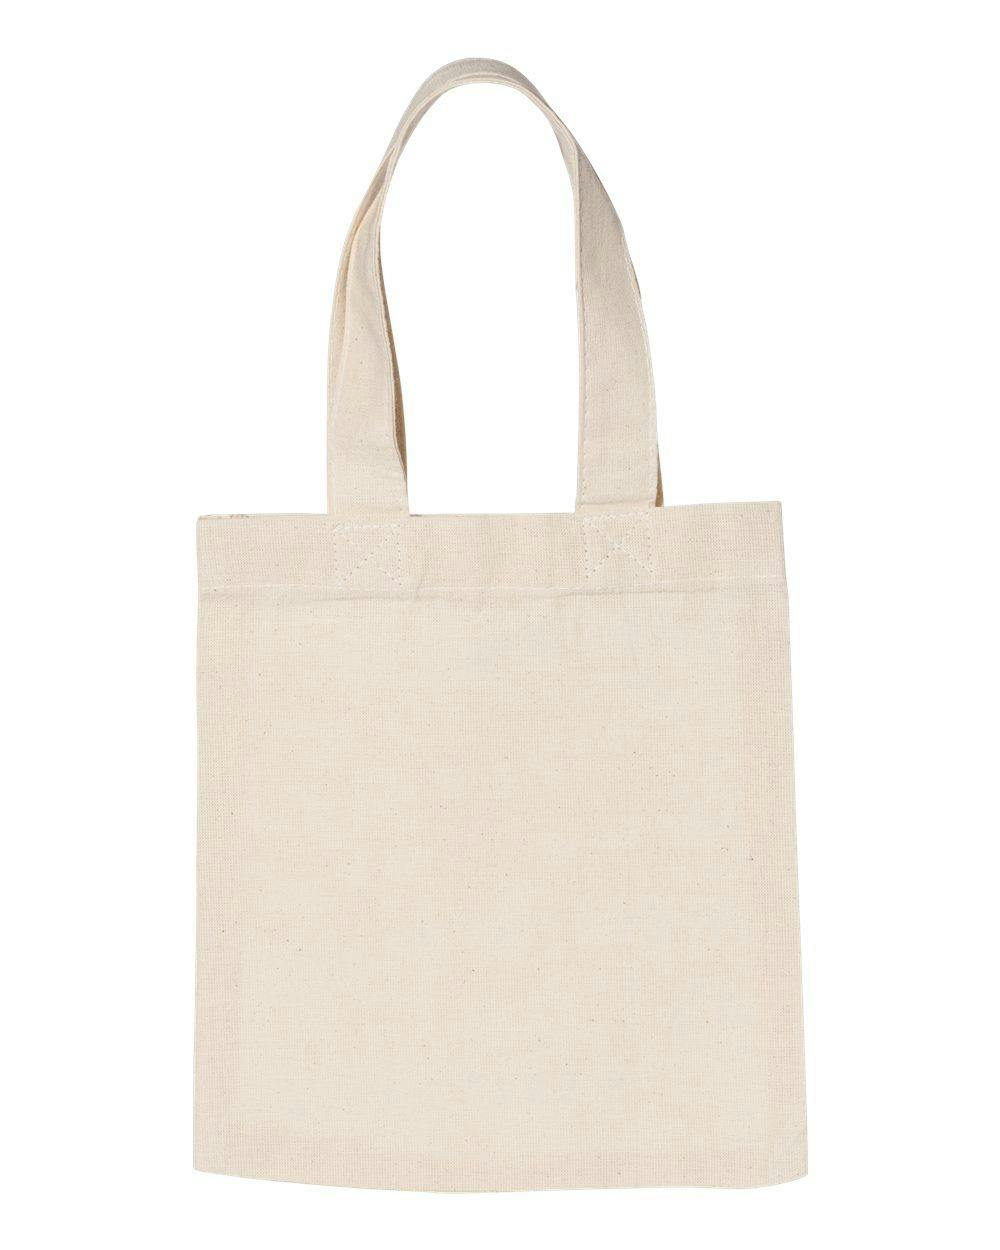 Image for Small Canvas Tote - OAD115